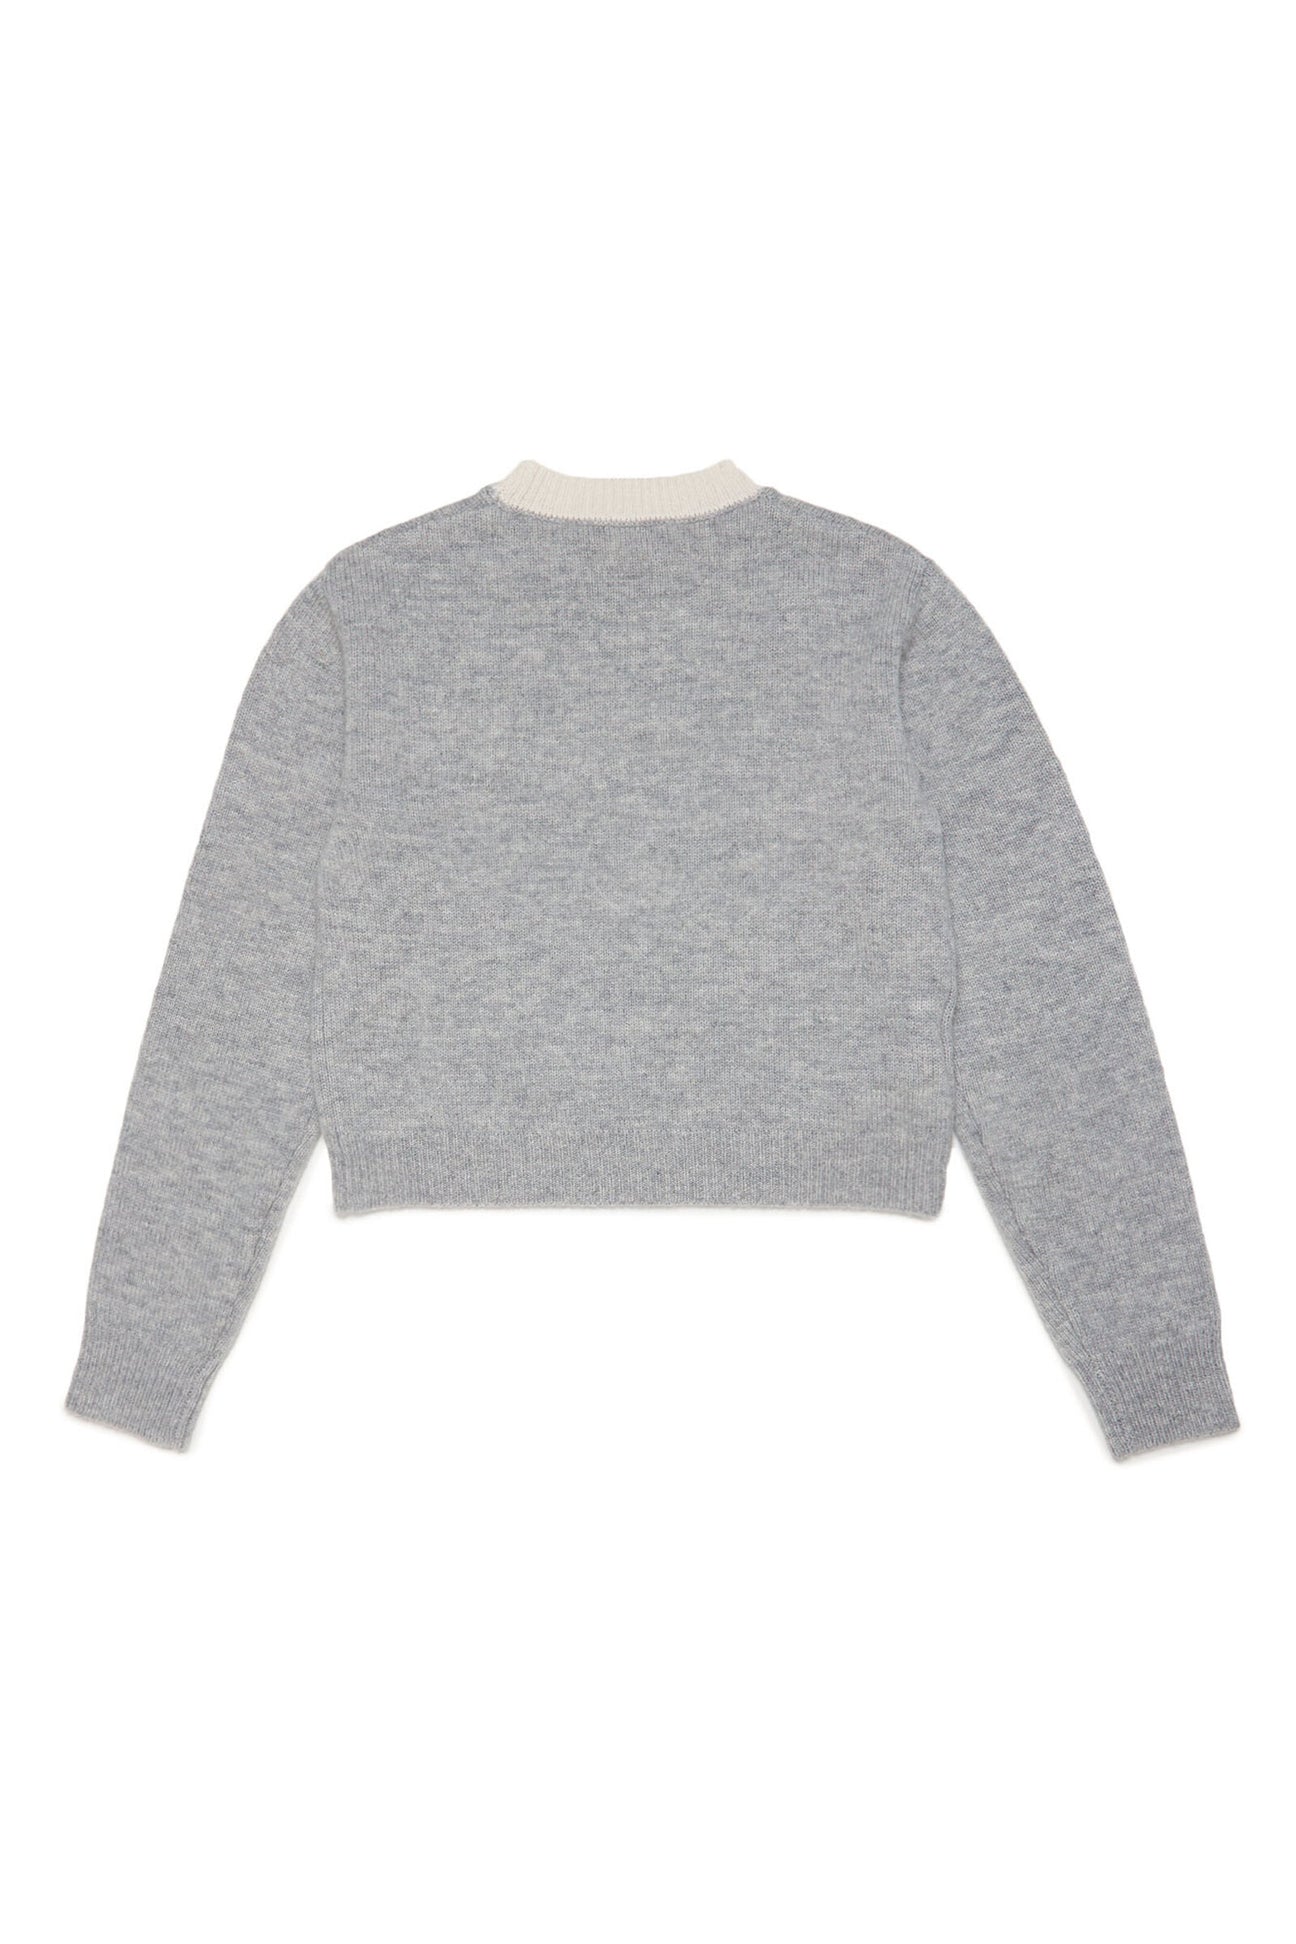 Grey sweater in wool-cashmere blend with jacquard logo and ribbed edges Grey sweater in wool-cashmere blend with jacquard logo and ribbed edges